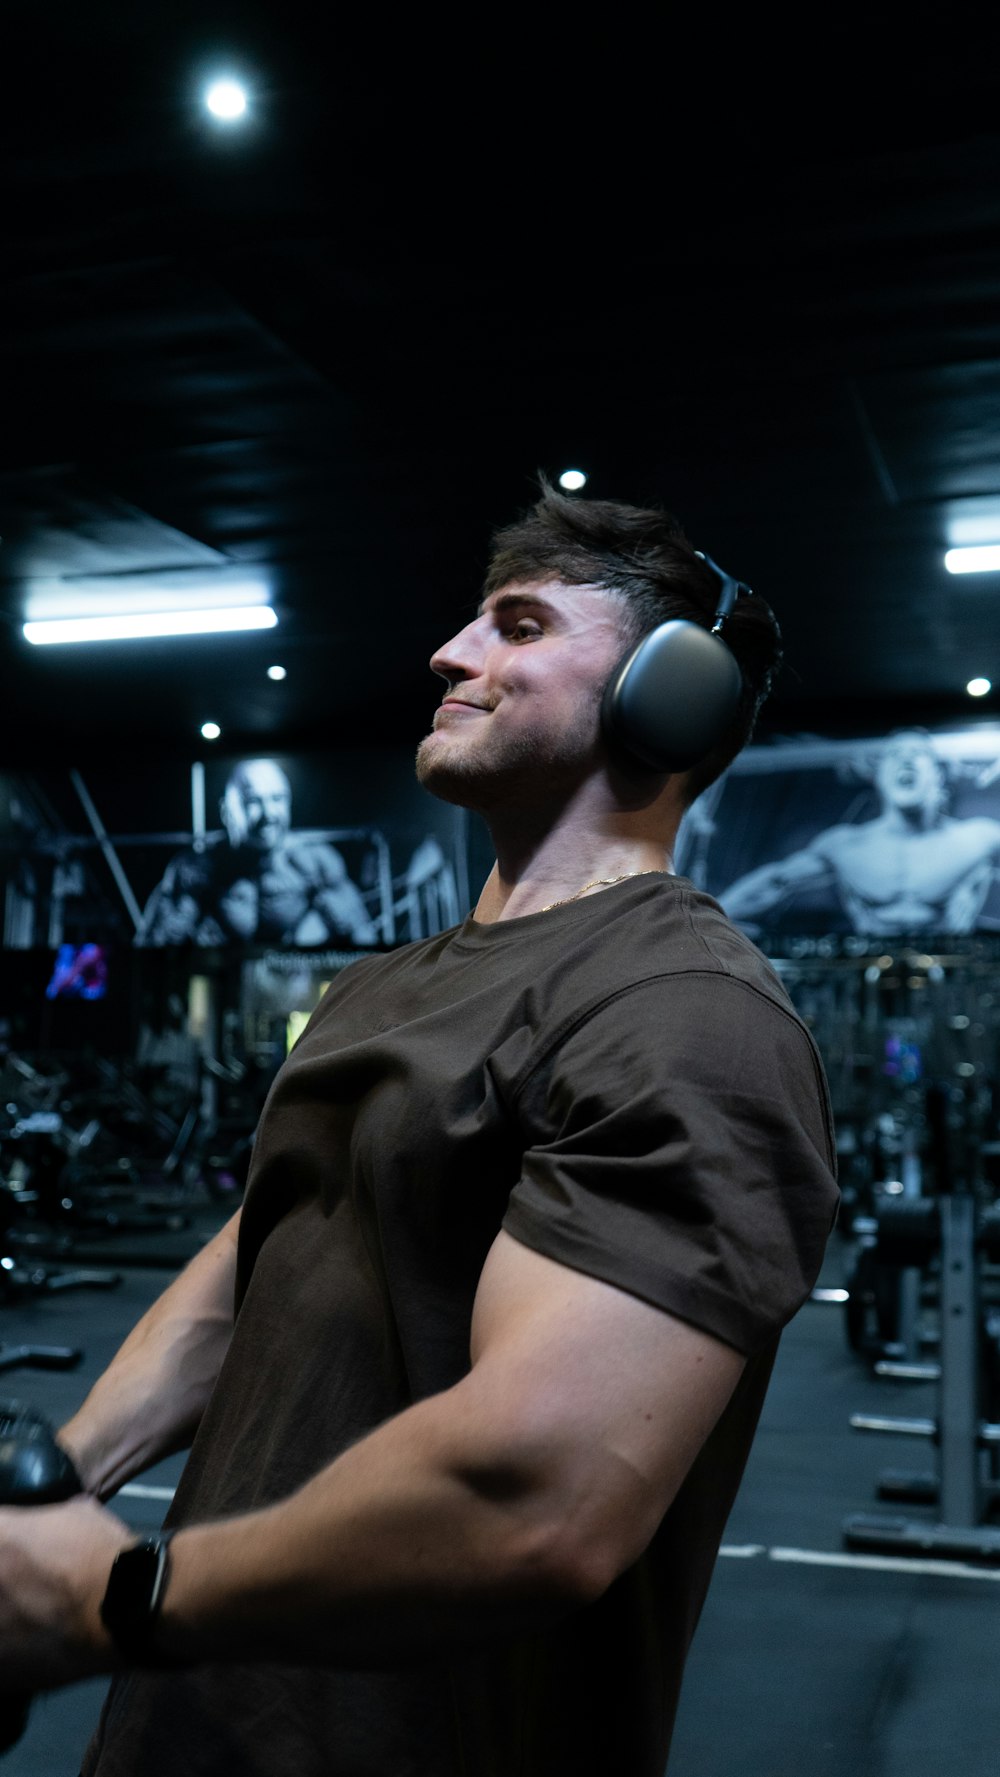 a man wearing headphones in a gym